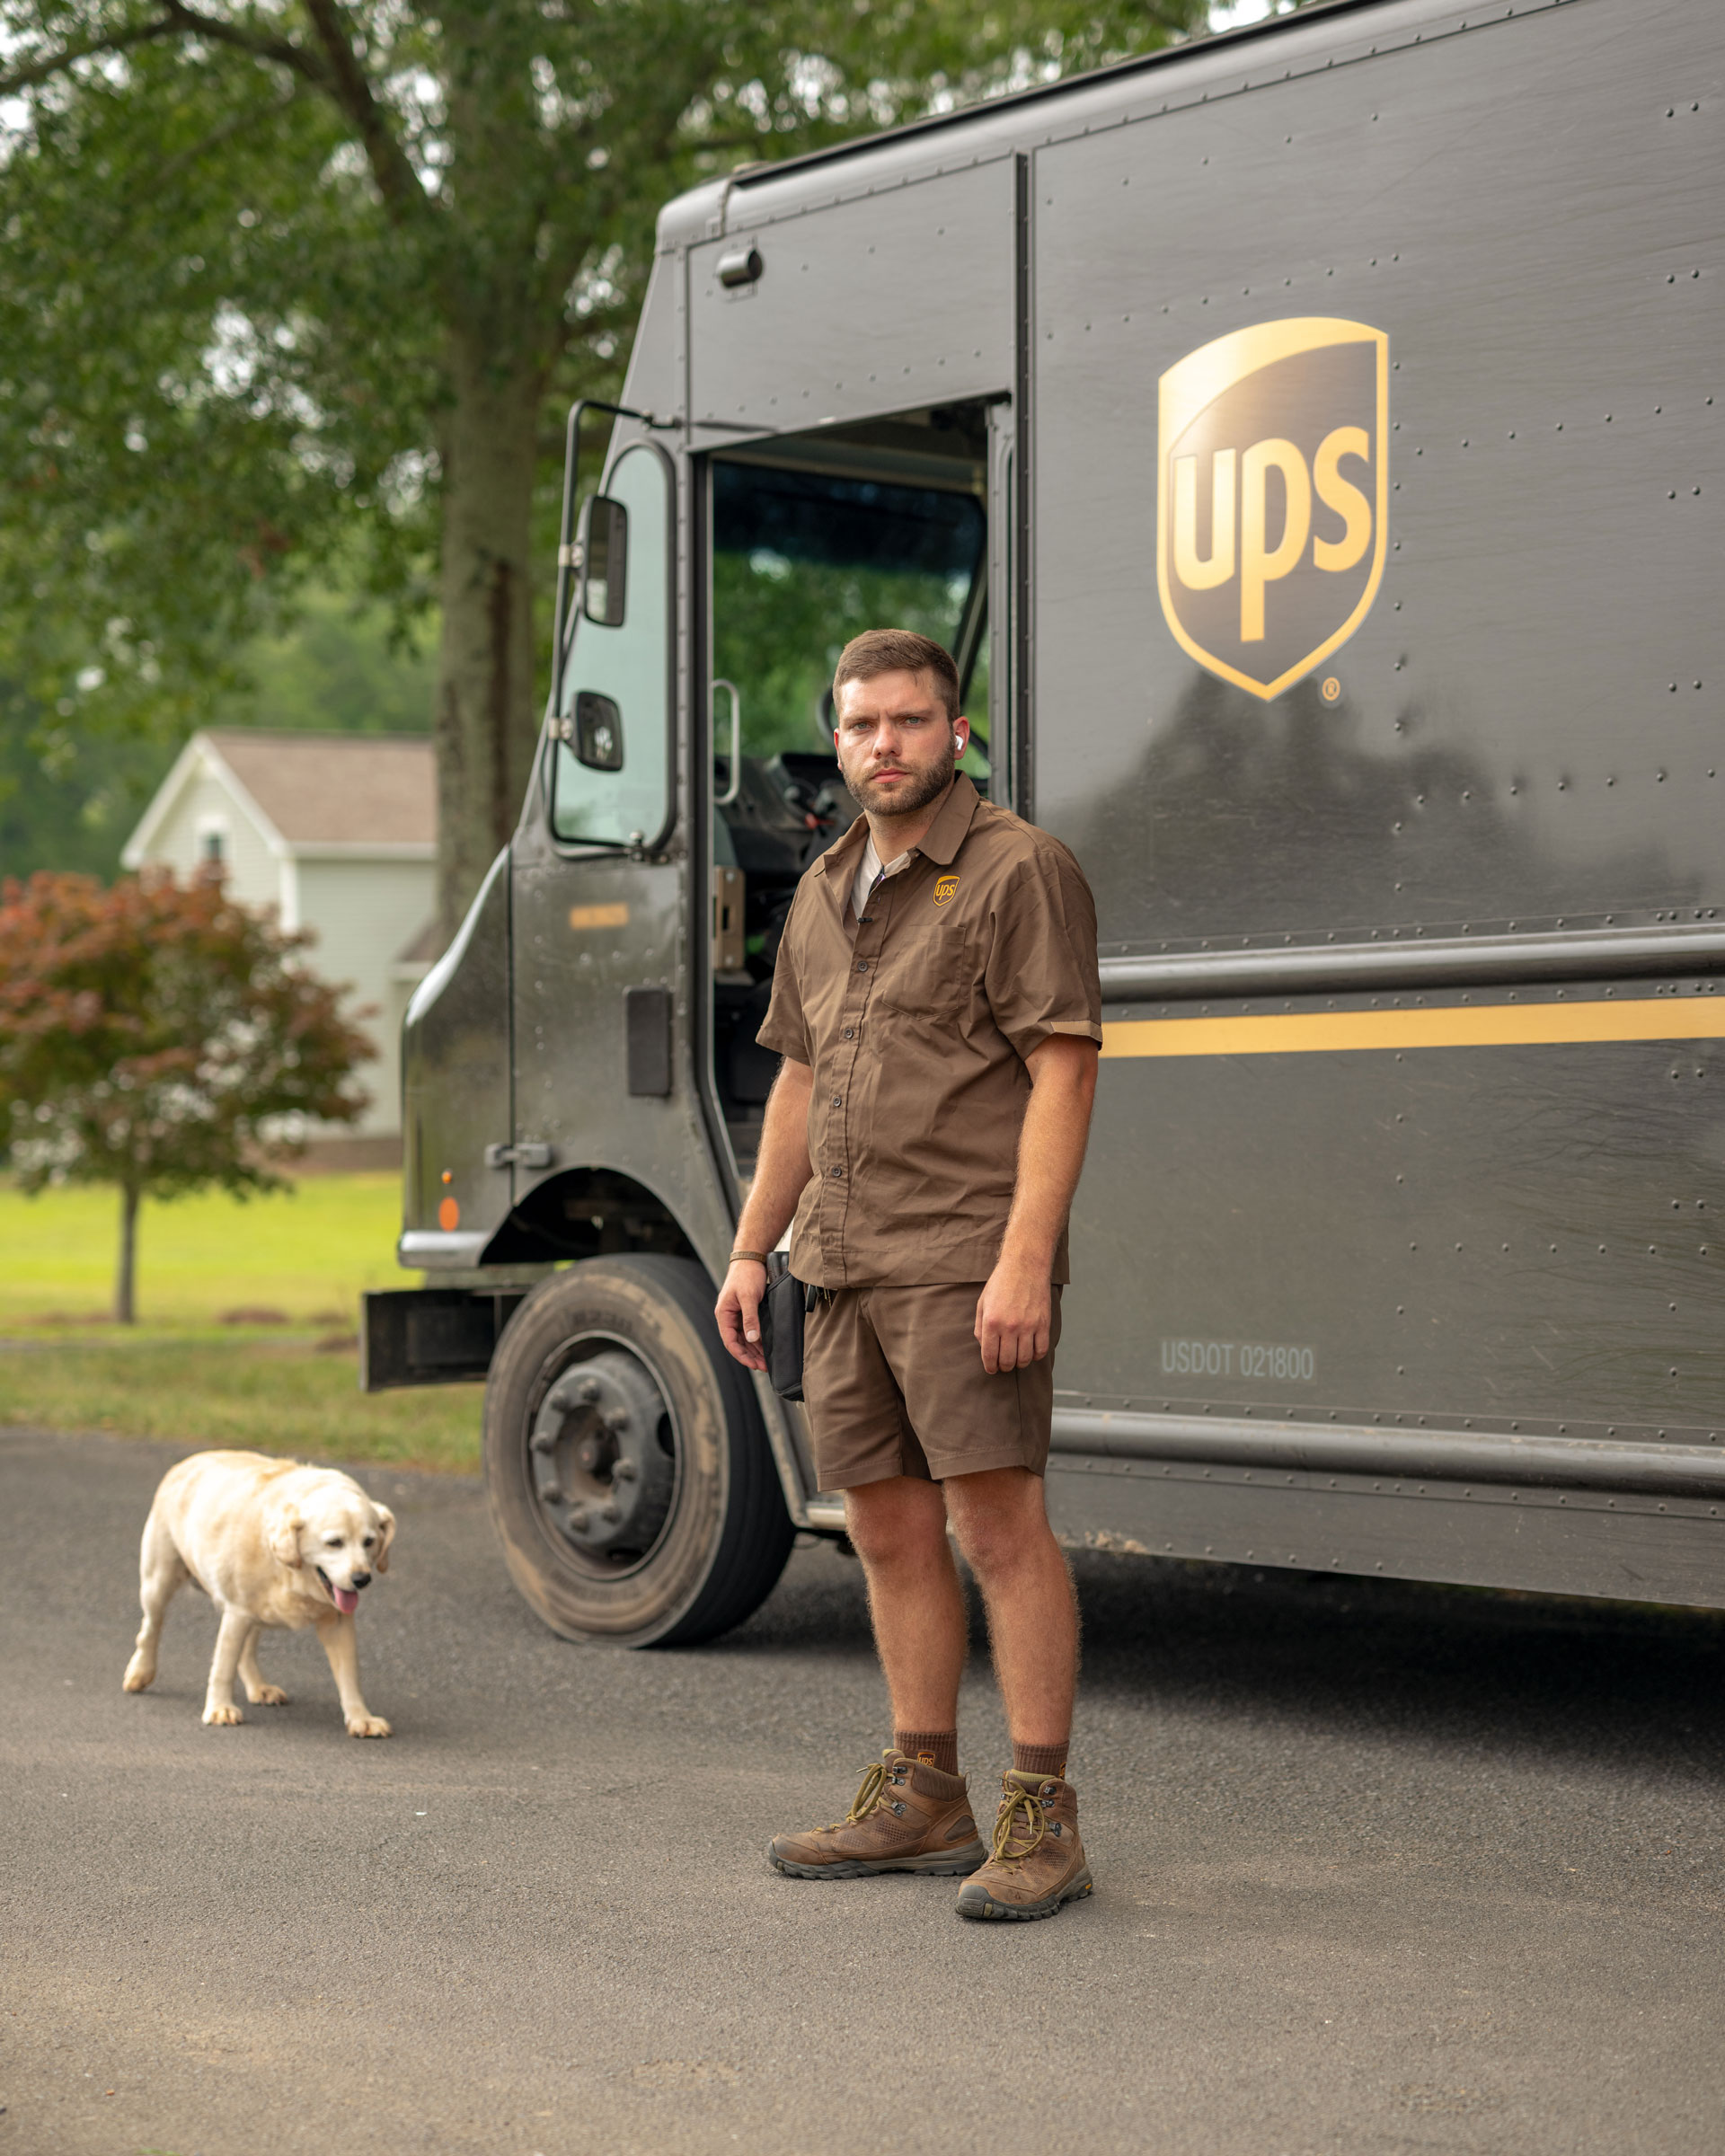 UPS driver Barkley Wimpee